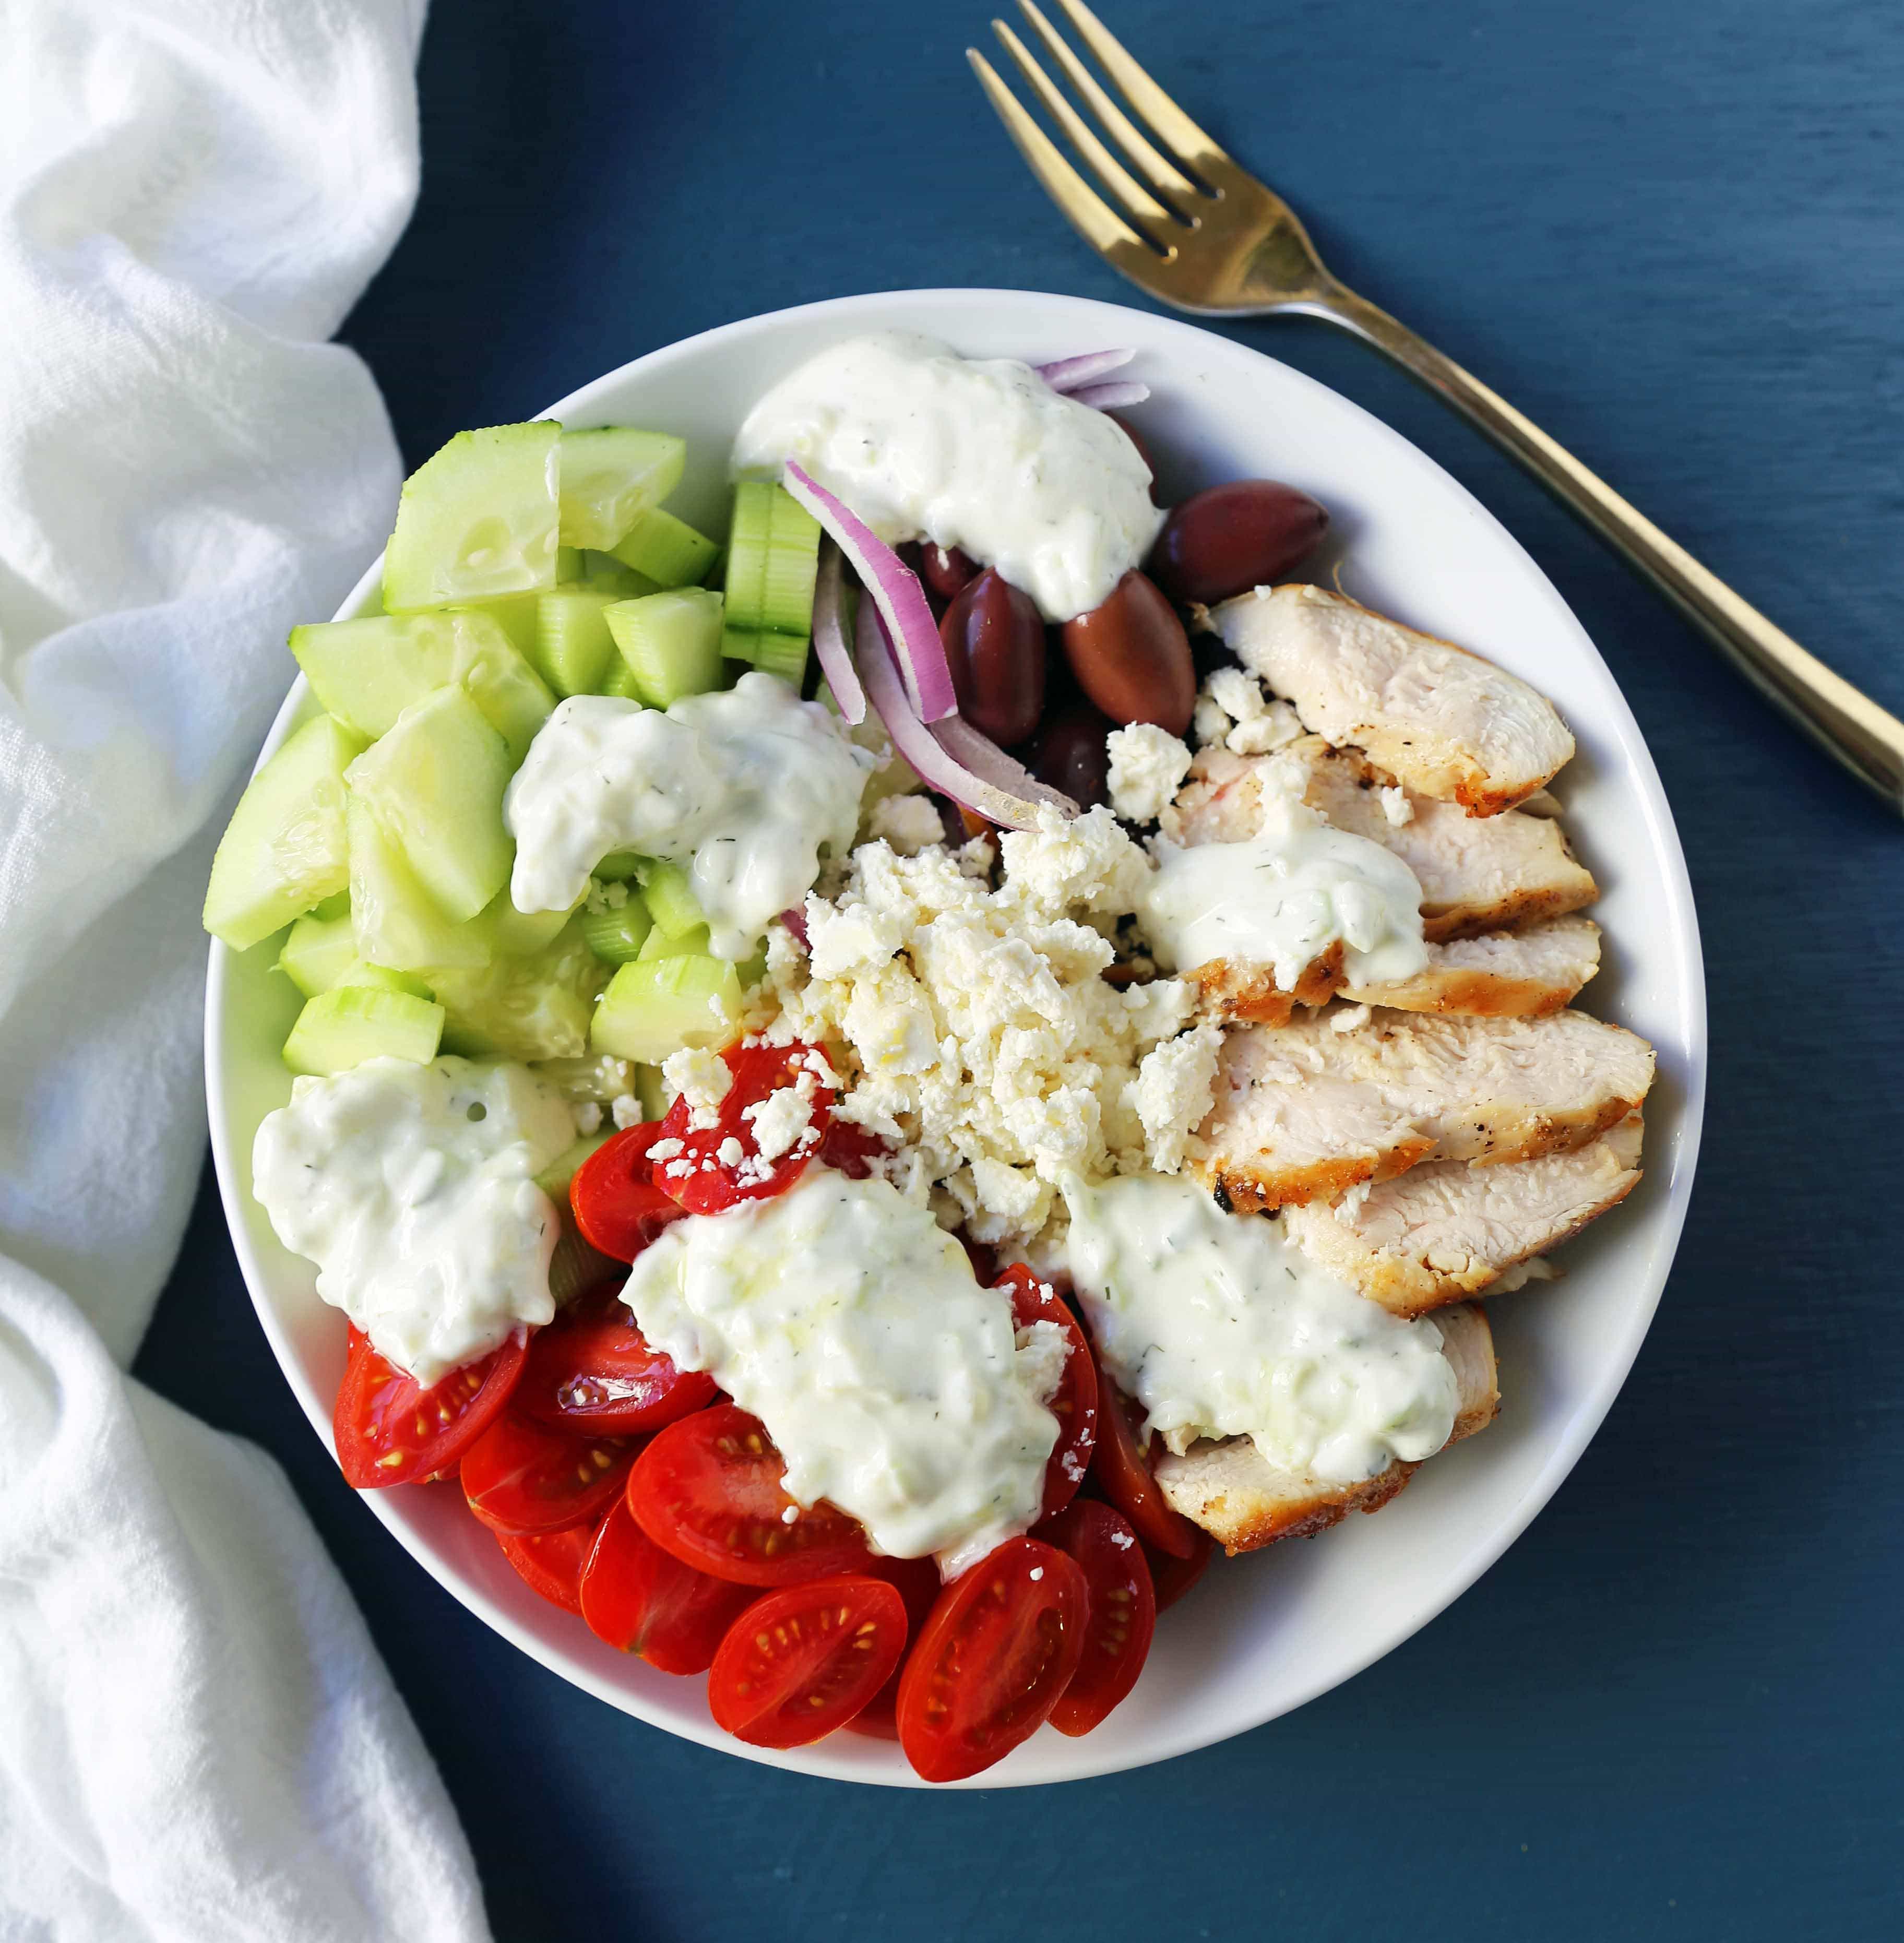 Greek Chicken Bowls. Grilled Greek Lemon Chicken, cucumber, tomatoes, red onion, kalamata olives, feta cheese, and homemade tzatziki sauce all in one bowl. A high-protein and low carb meal! www.modernhoney.com #greekchickenbowls #greekchickenbowl #greekfood #glutenfree